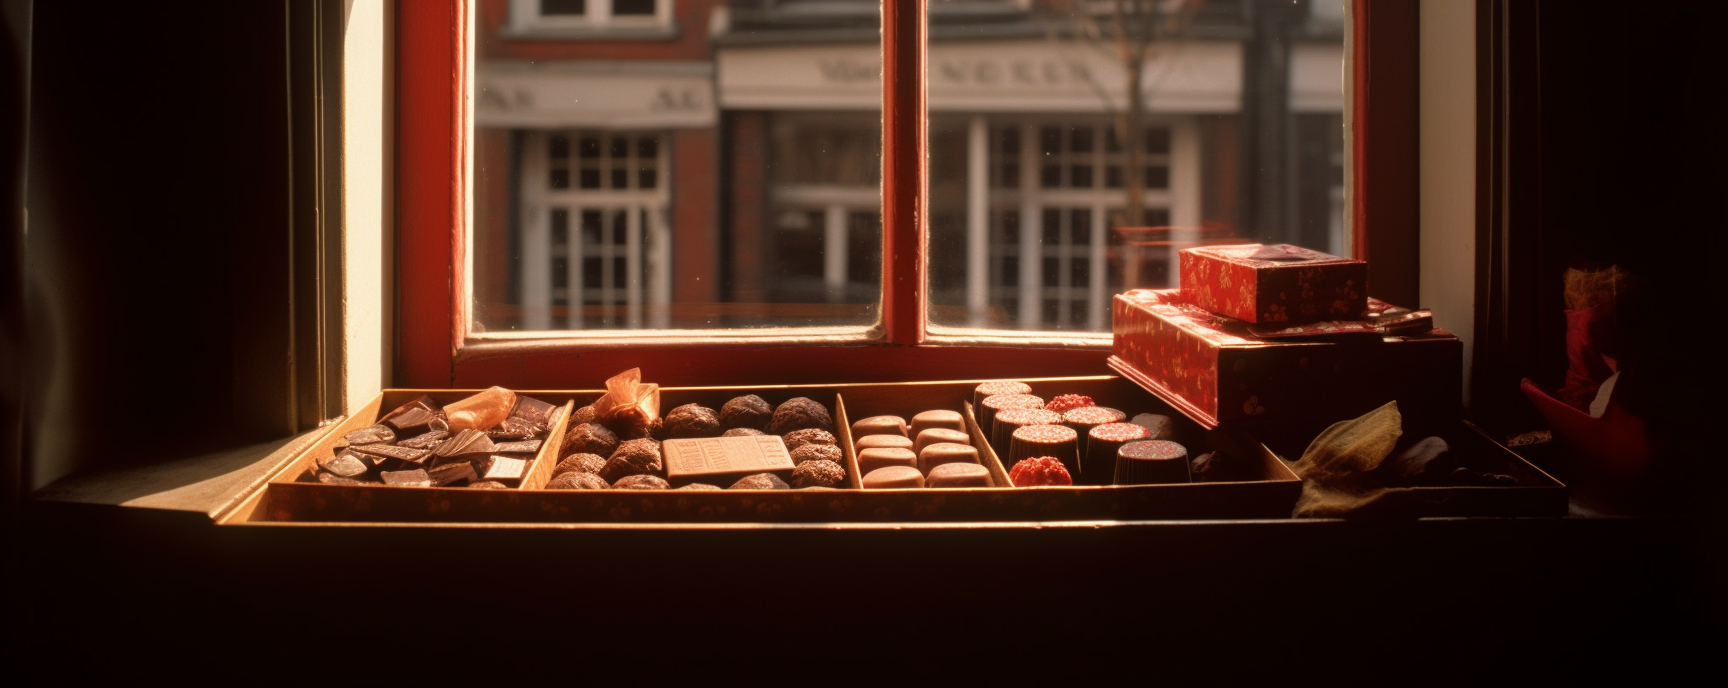 A box of chocolate in the window of a chocolatier